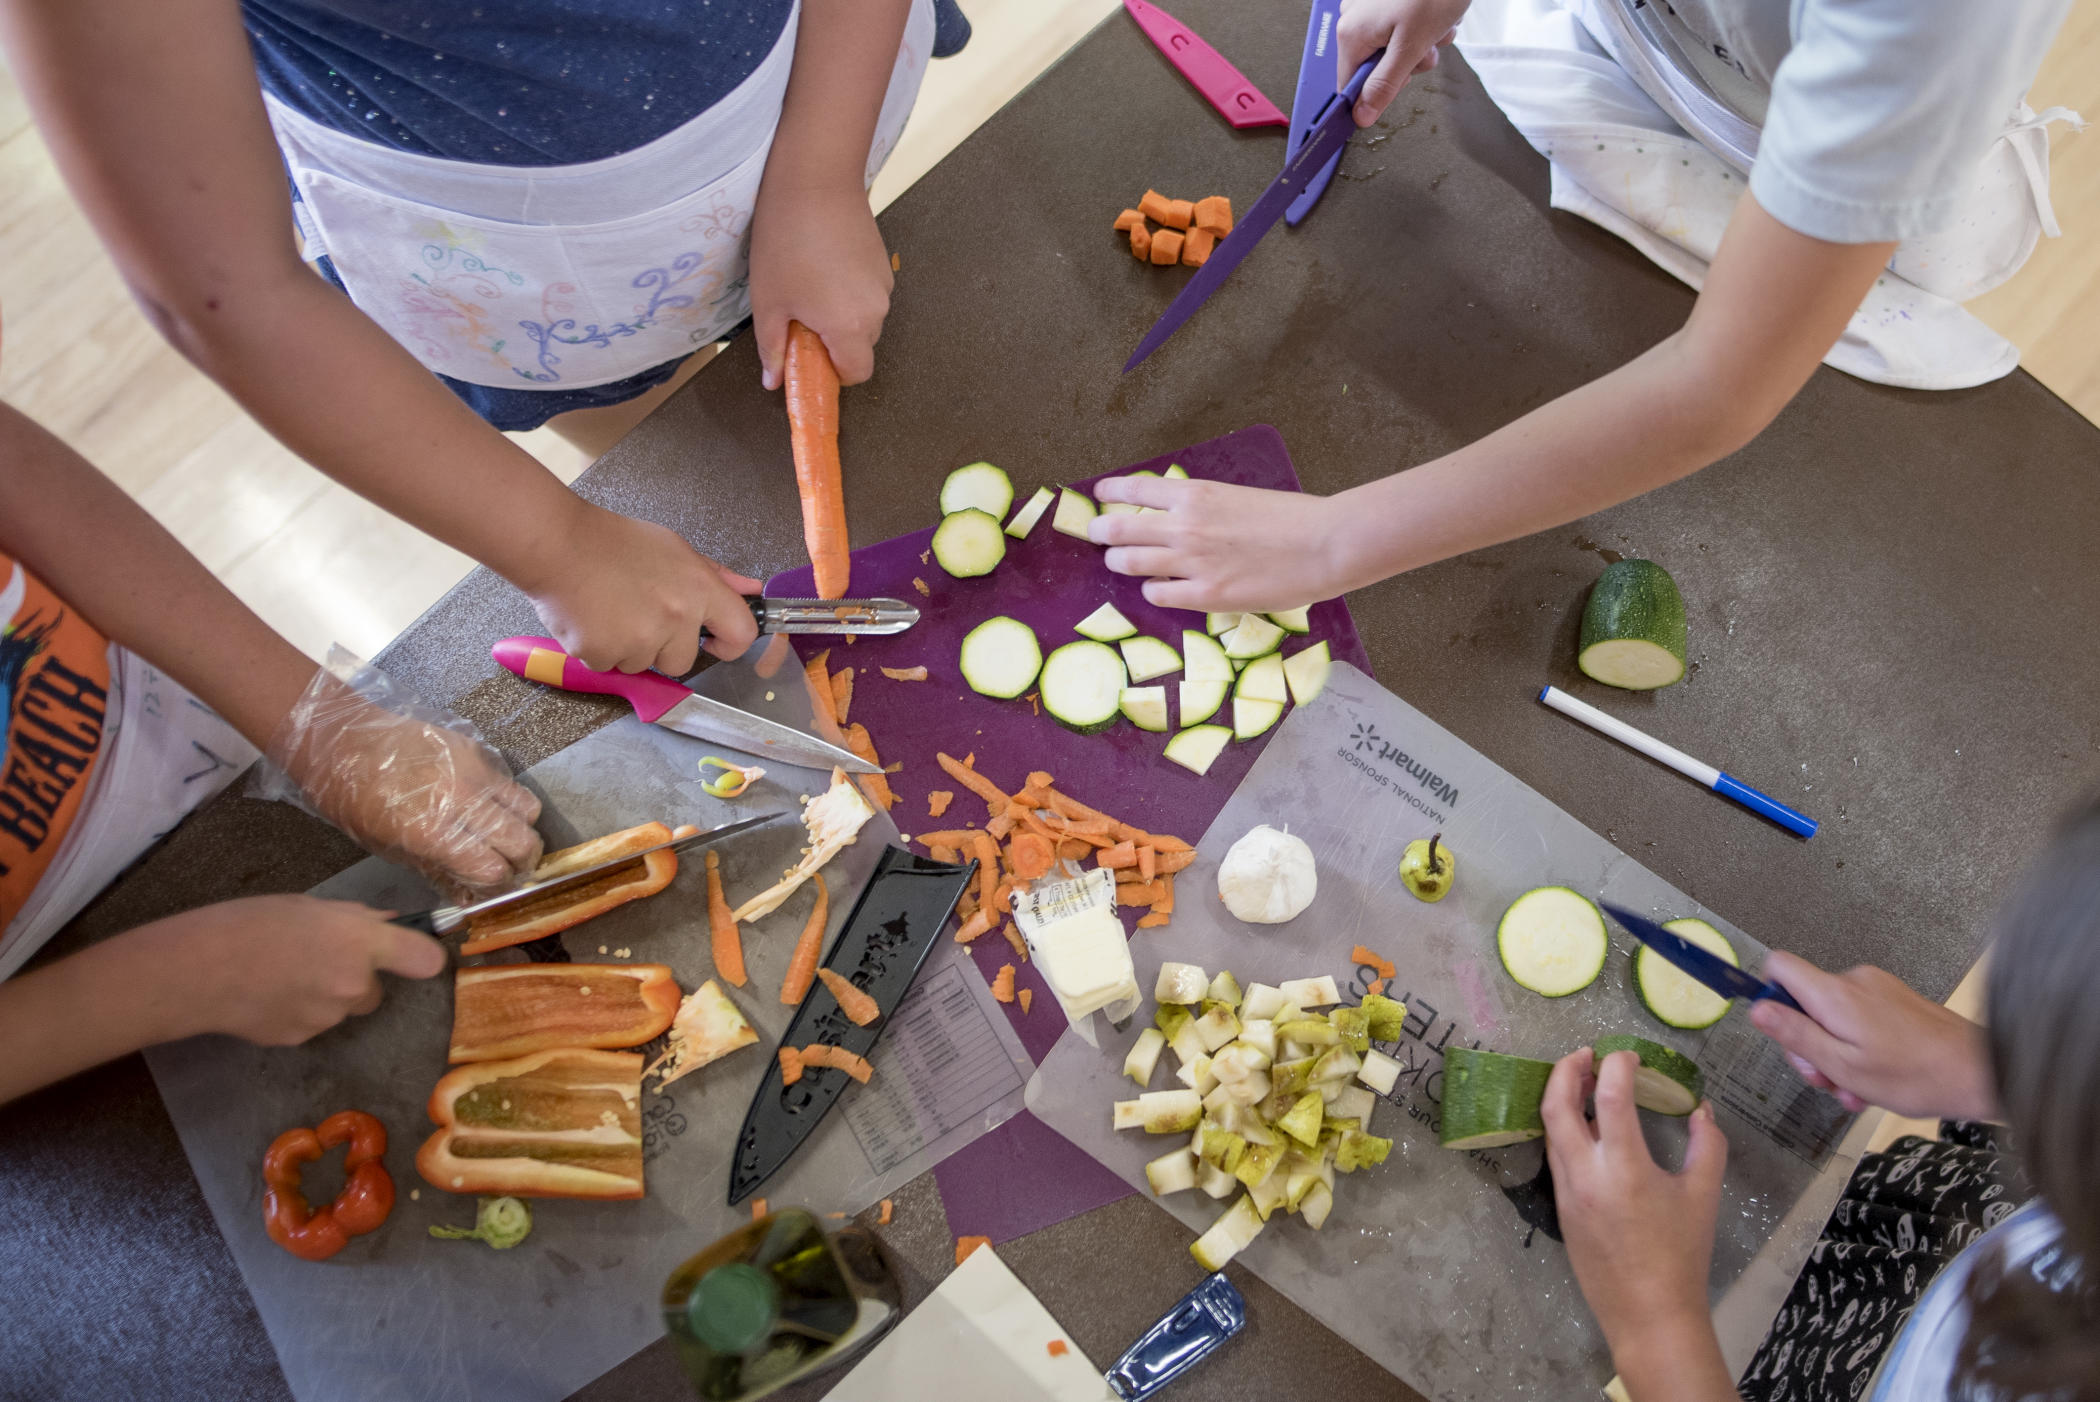 Overhead view of children chopping vegetables on cutting boards